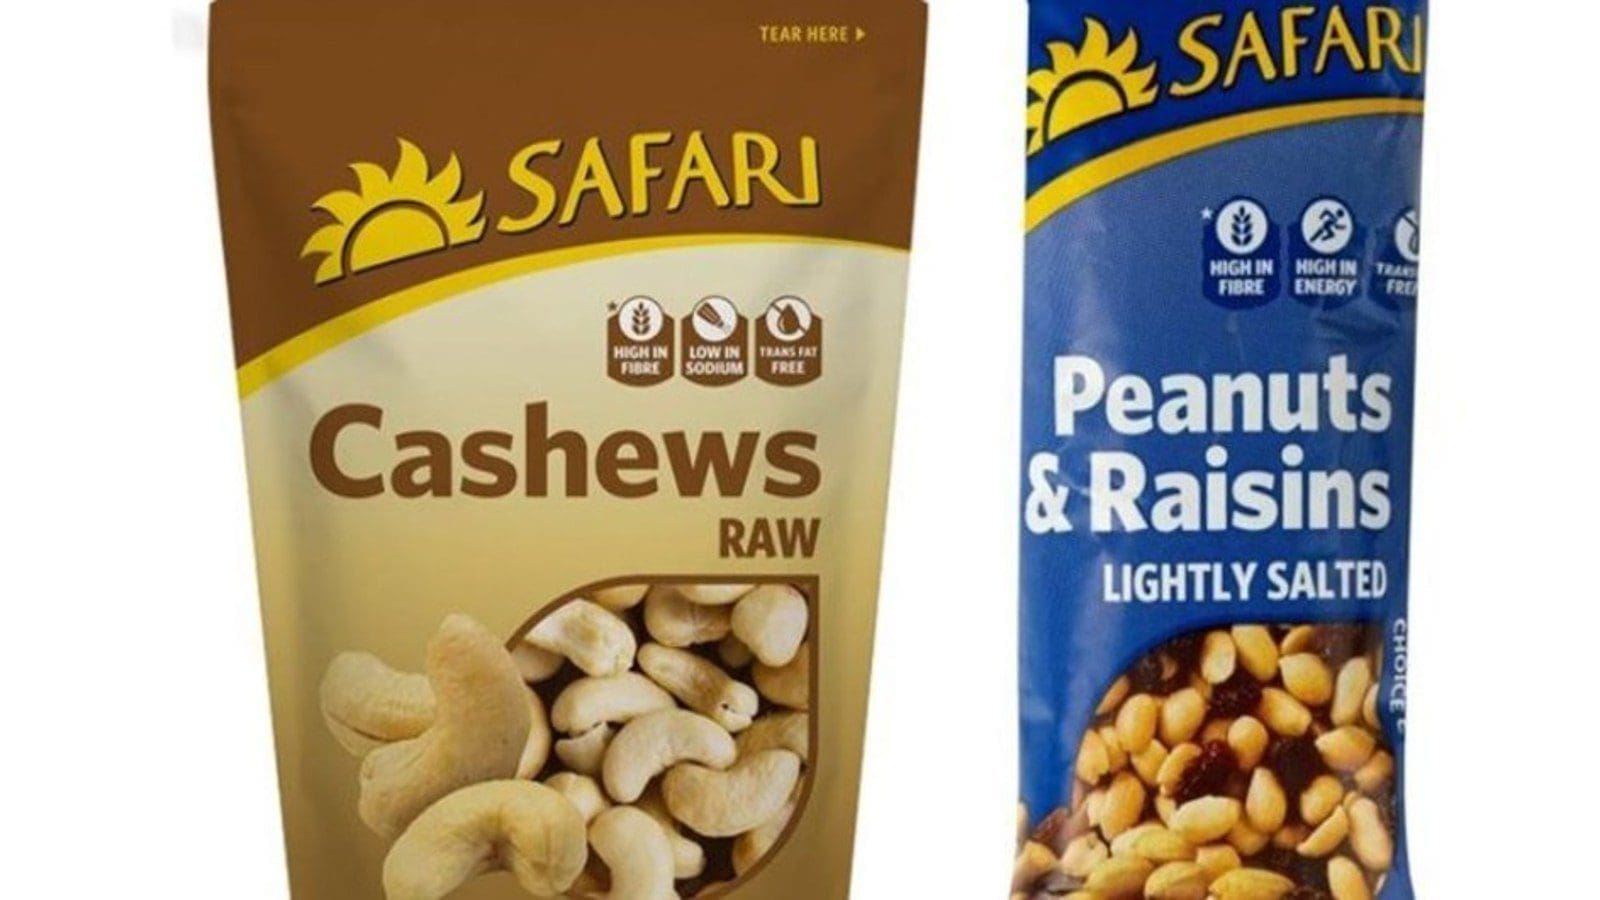 Pioneer Foods detects Salmonella in its  Safari brands products, recalls products